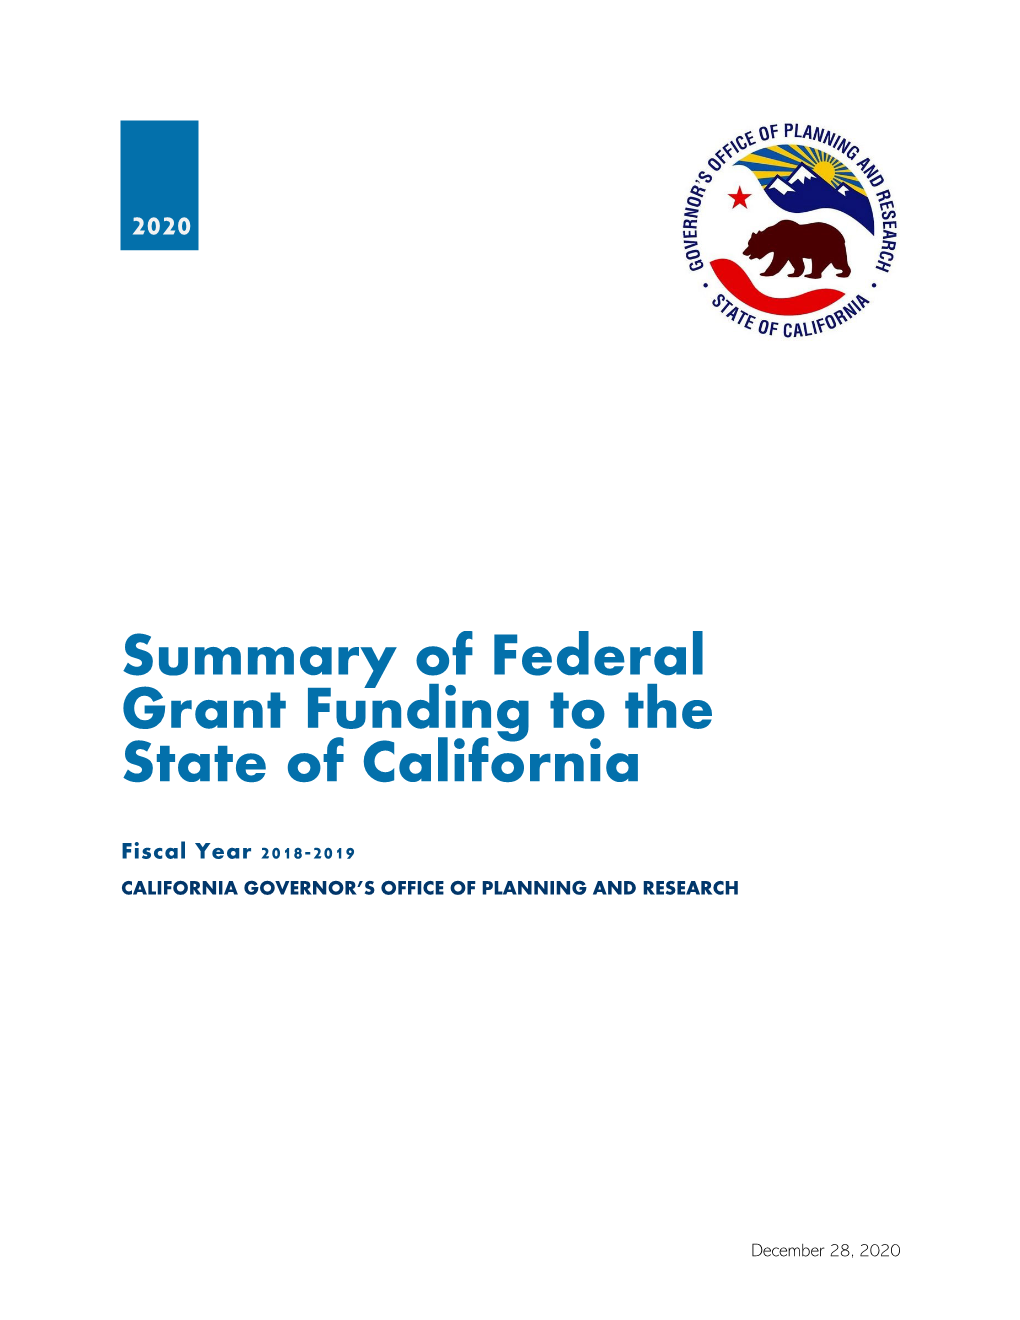 Summary of Federal Grant Funding to the State of California